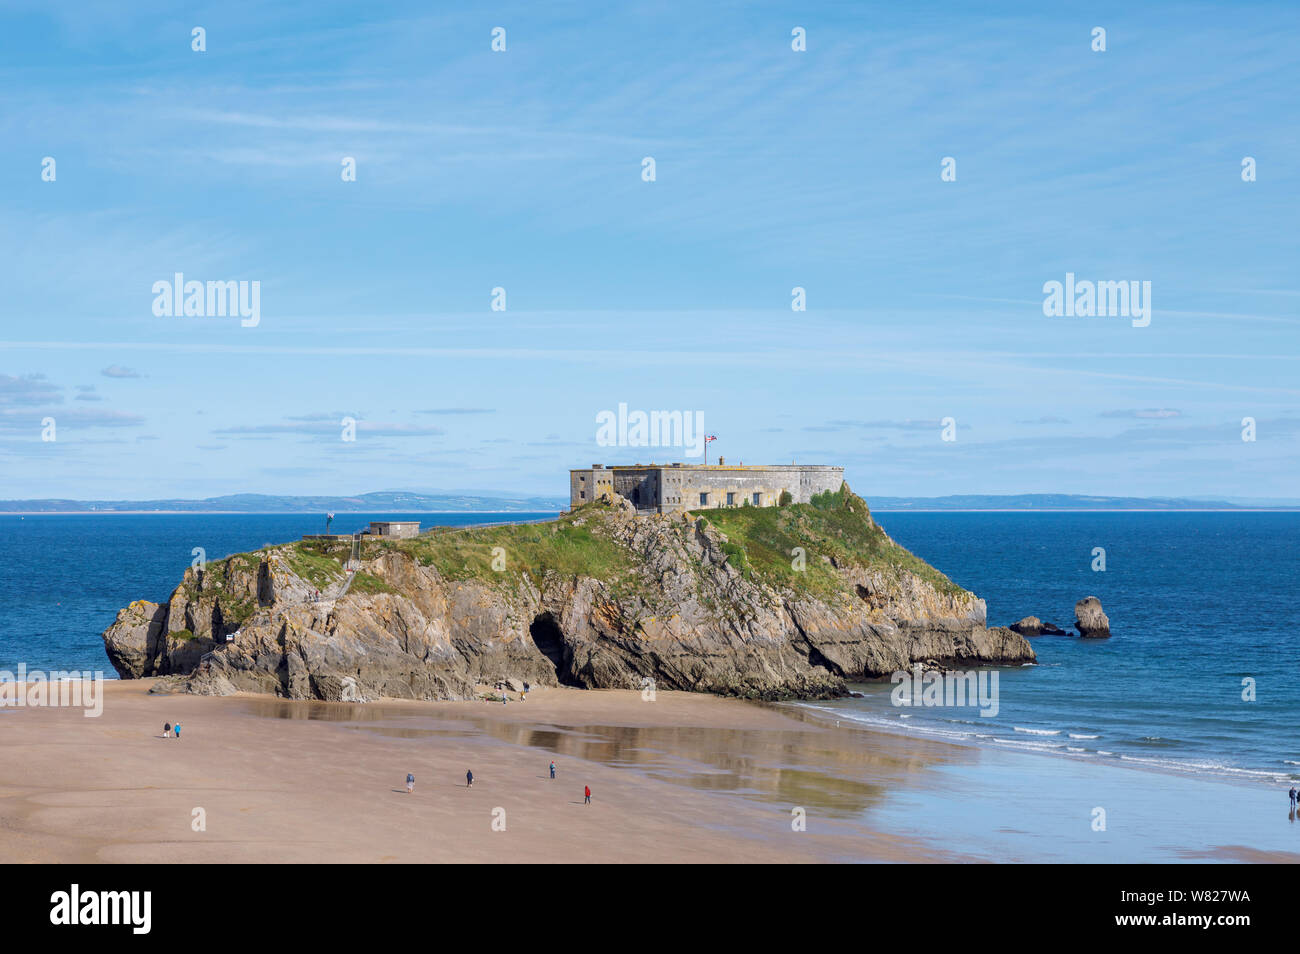 St Catherine's Island and South Beach at Tenby, a walled seaside town in Pembrokeshire, south Wales coast on the western side of Carmarthen Bay Stock Photo